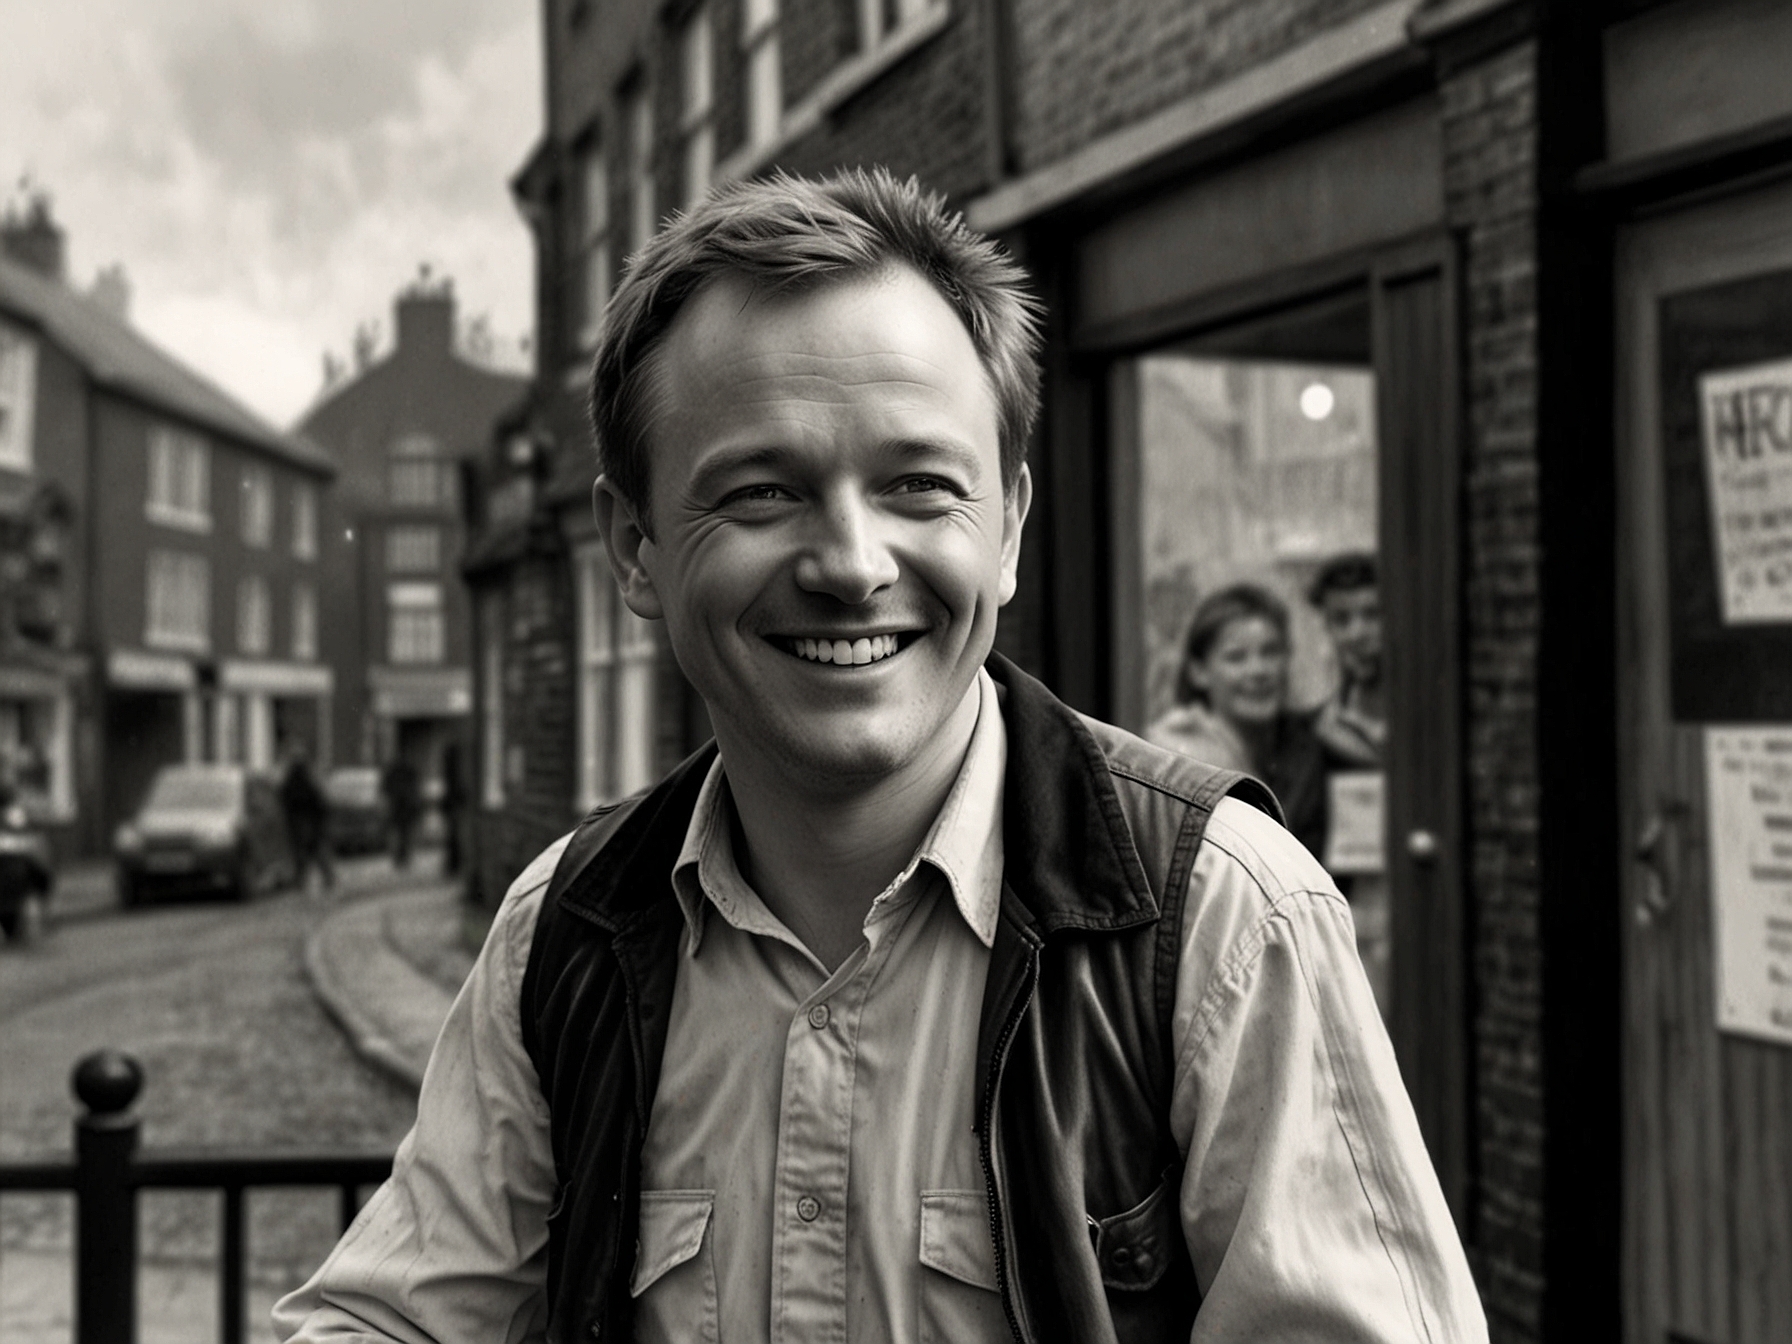 A black-and-white photograph of Terry Joyce smiling warmly, taken during his time on Byker Grove. Colleagues and fans remember his charismatic presence and comedic talent fondly.